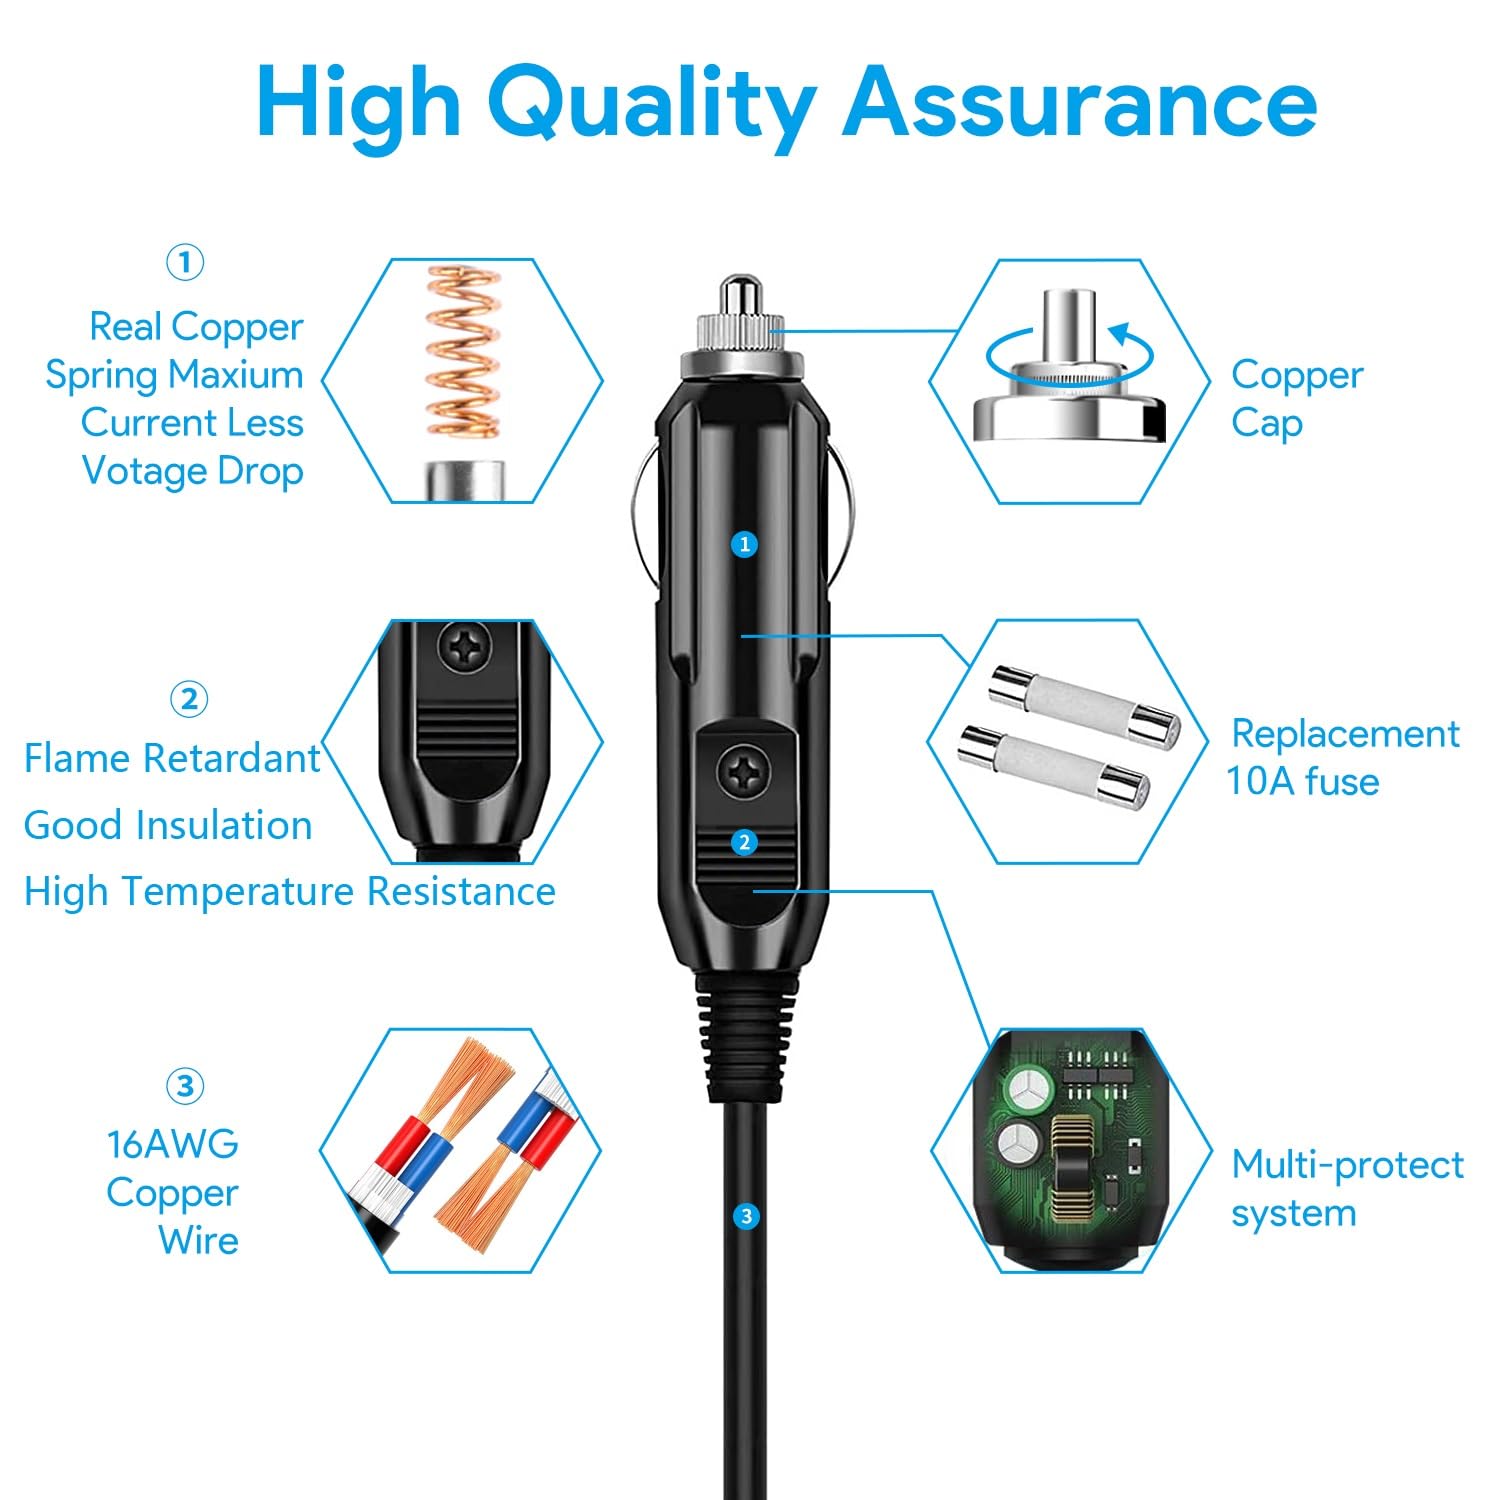 MJPOWER 12V/24V Car Charger Cable for Rockpals WCE001 RP250W 250W 240Wh K53 350W 288Wh,ALLWEI 300W/500W,FlashFish 150-200W Portable Power Station and More Other Brand Solar Generator Charging Cord